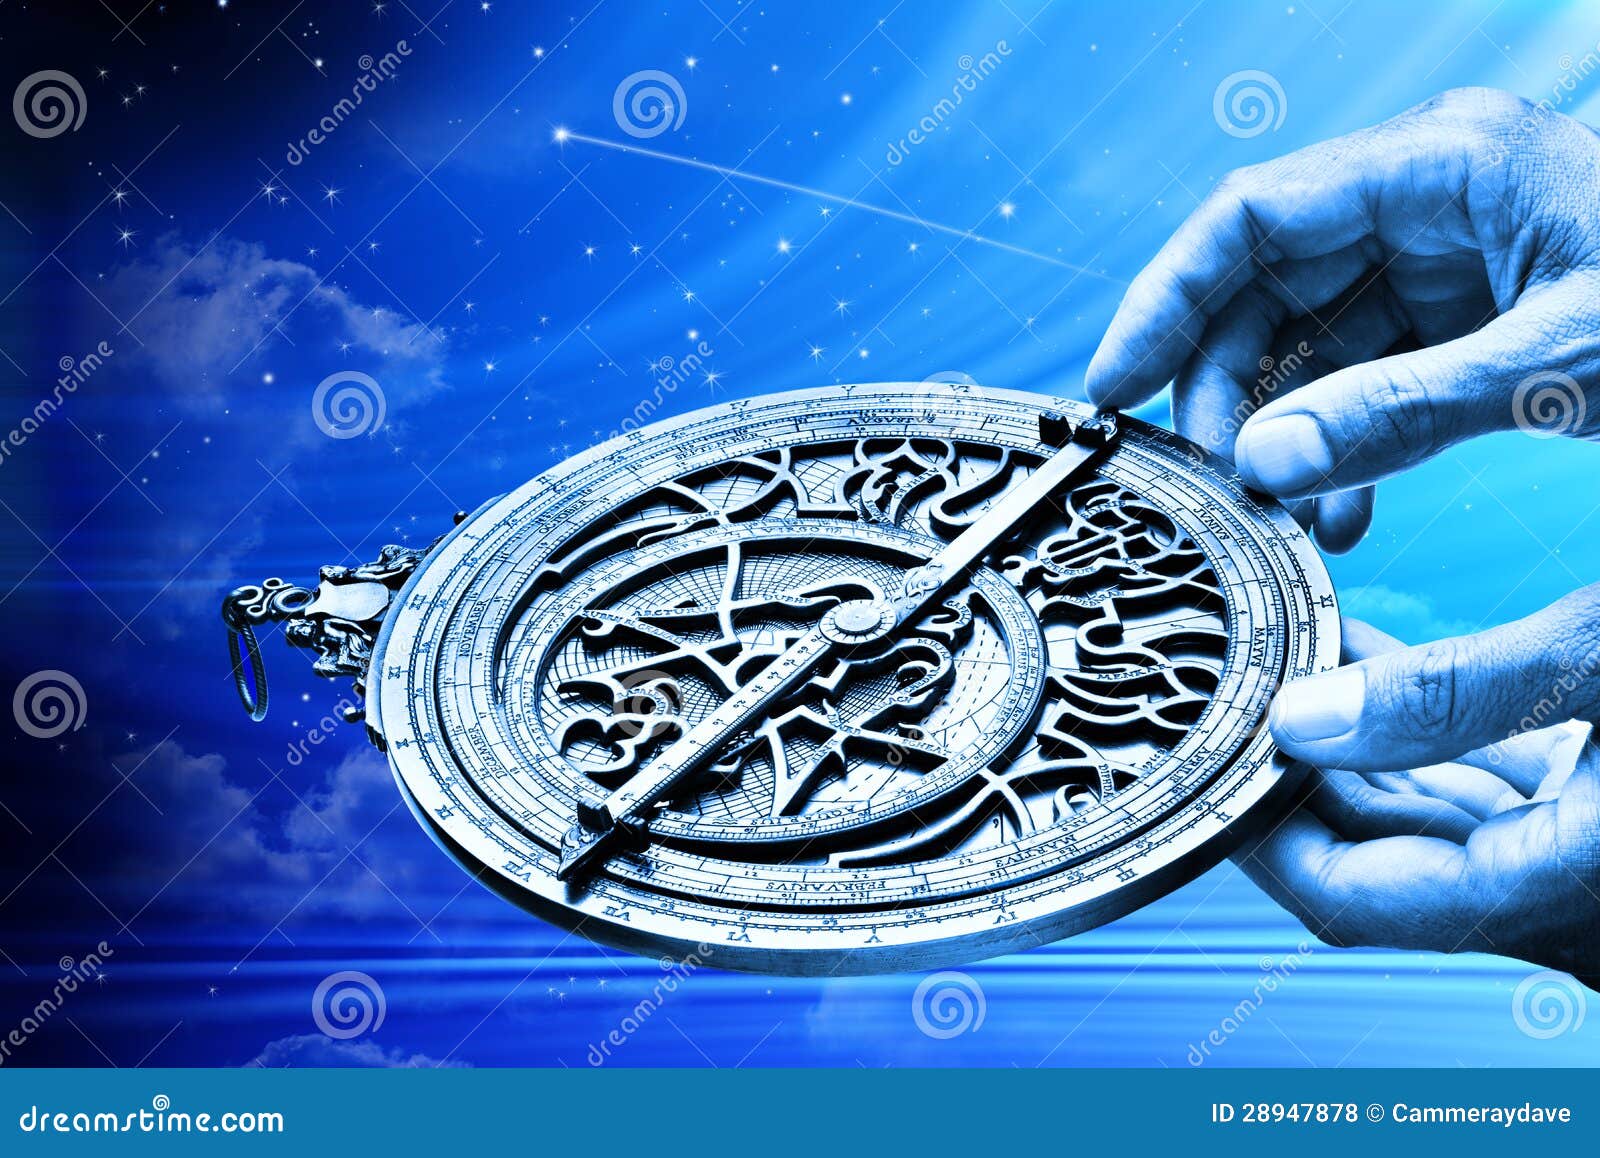 Astrolabe Astrology Charts